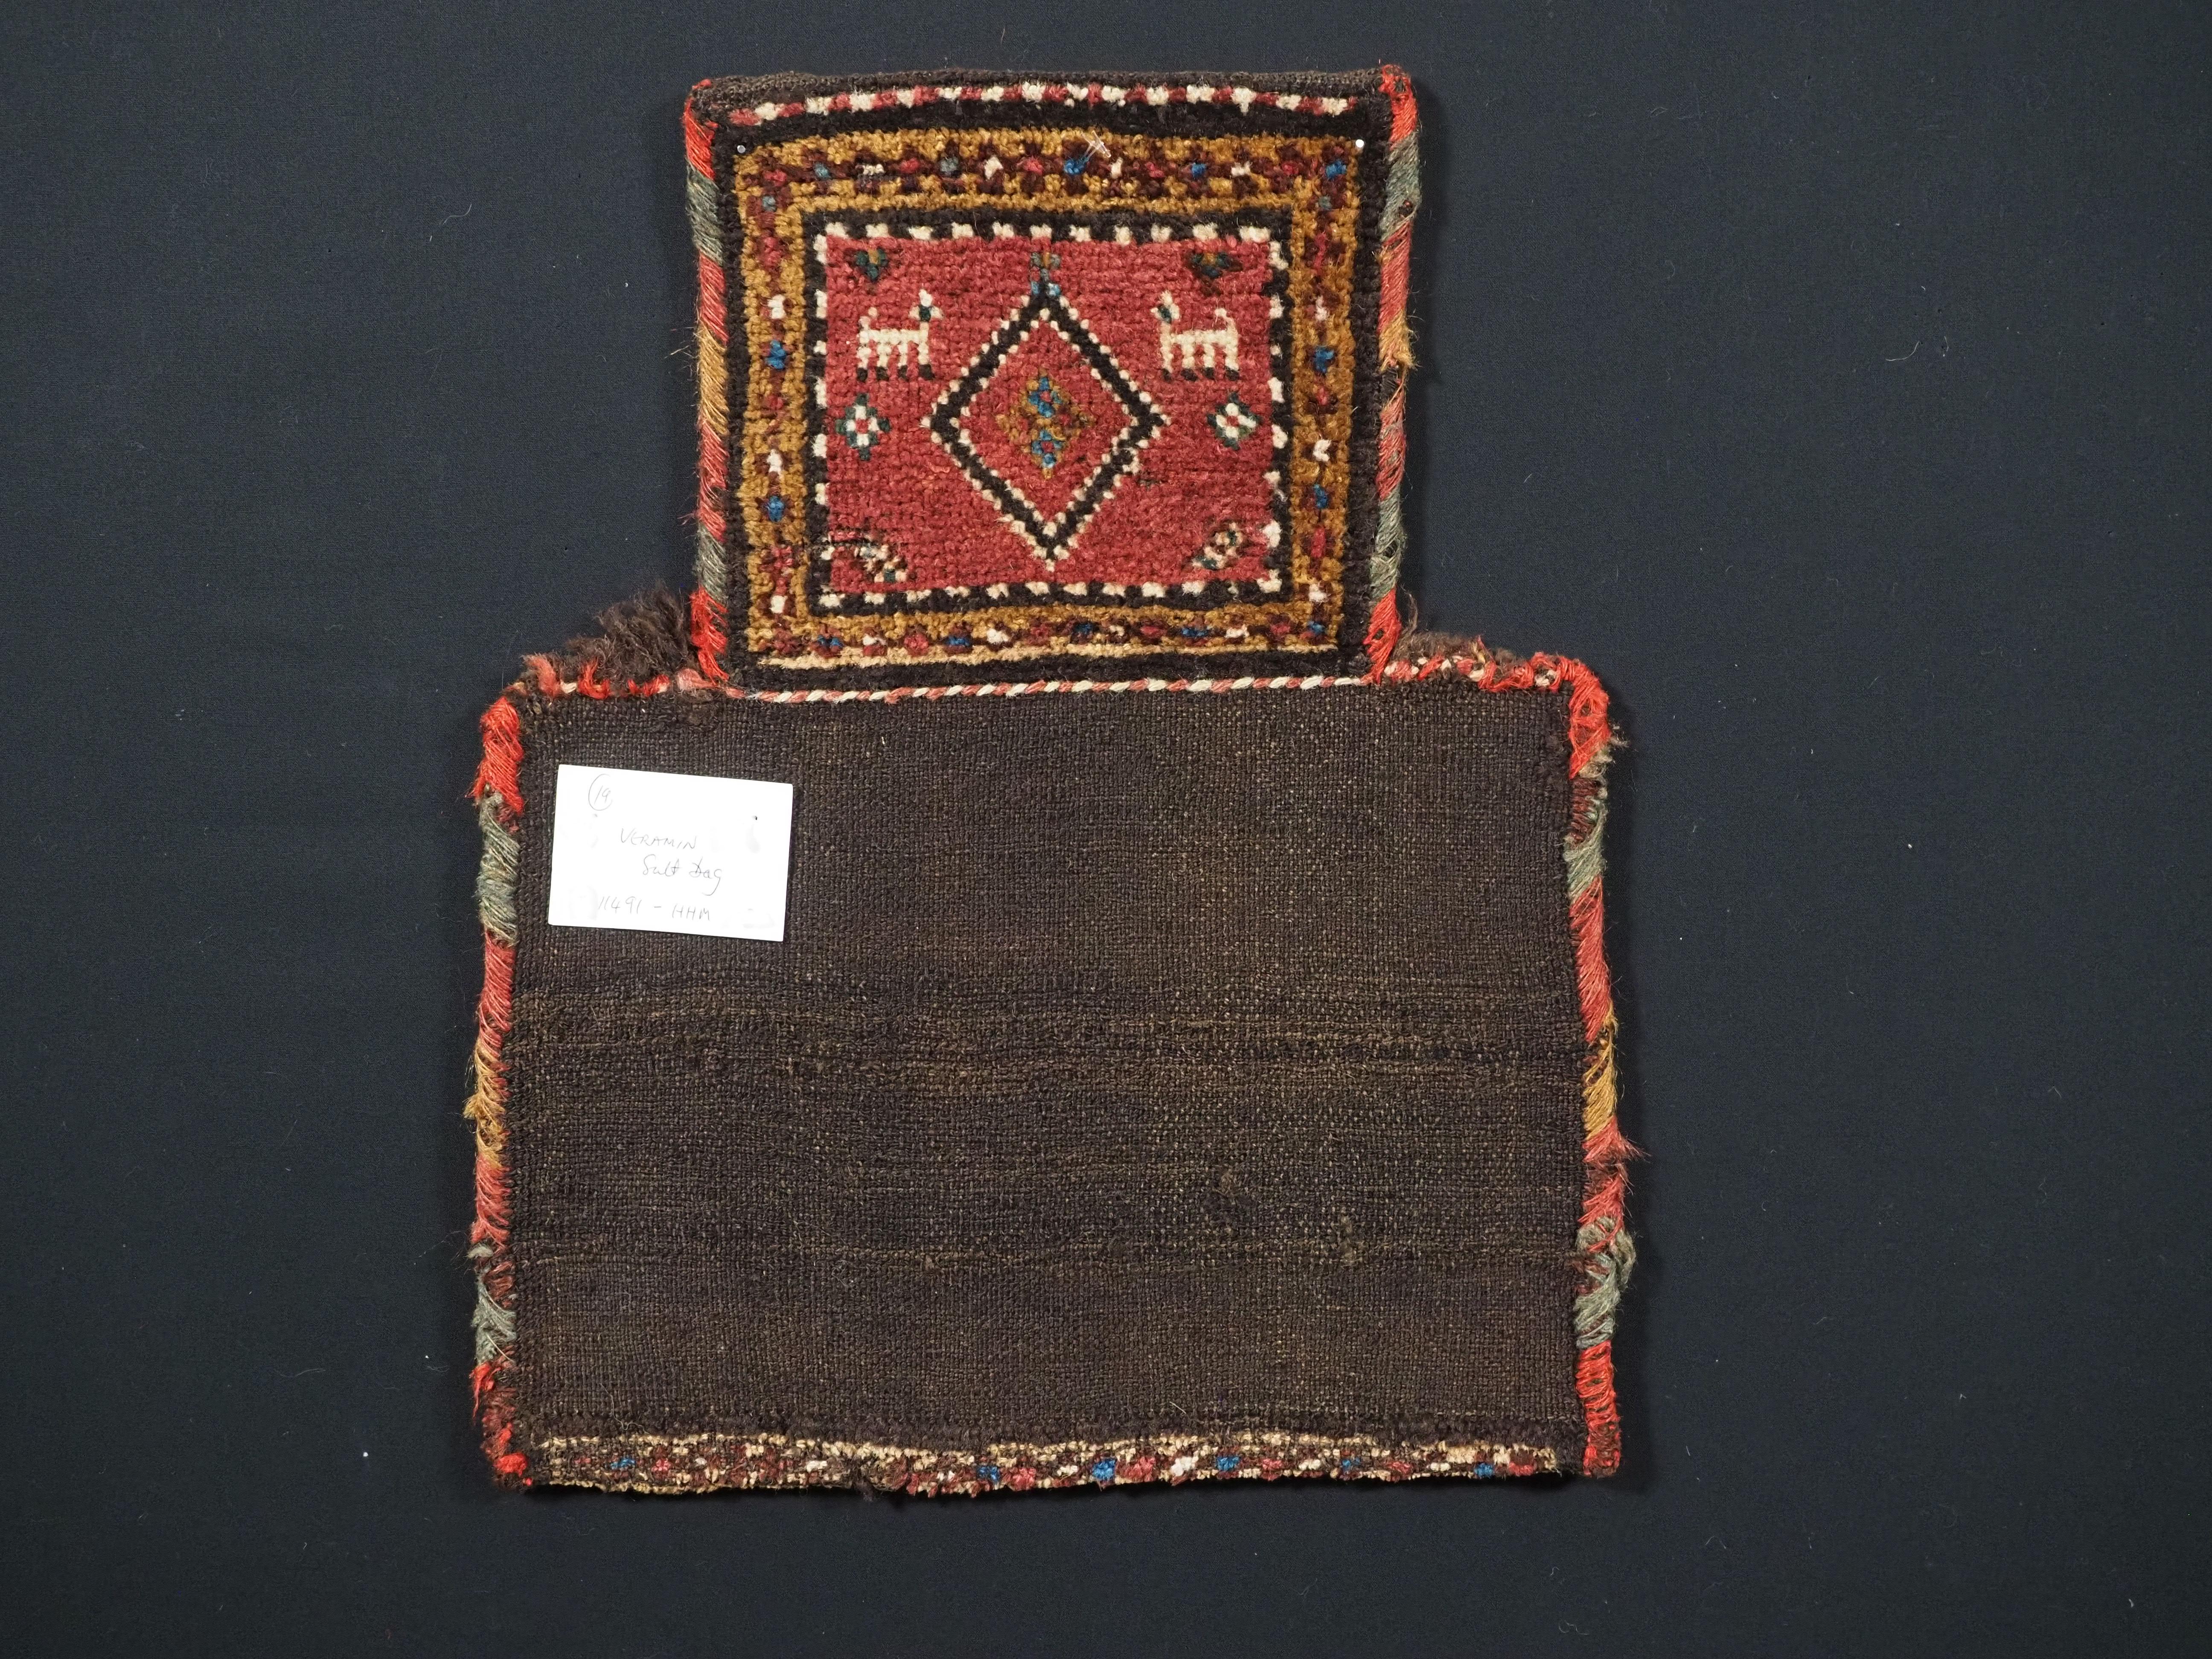 Antique salt-bag by the nomads of the Varamin region, circa 1900 In Good Condition For Sale In Moreton-In-Marsh, GB